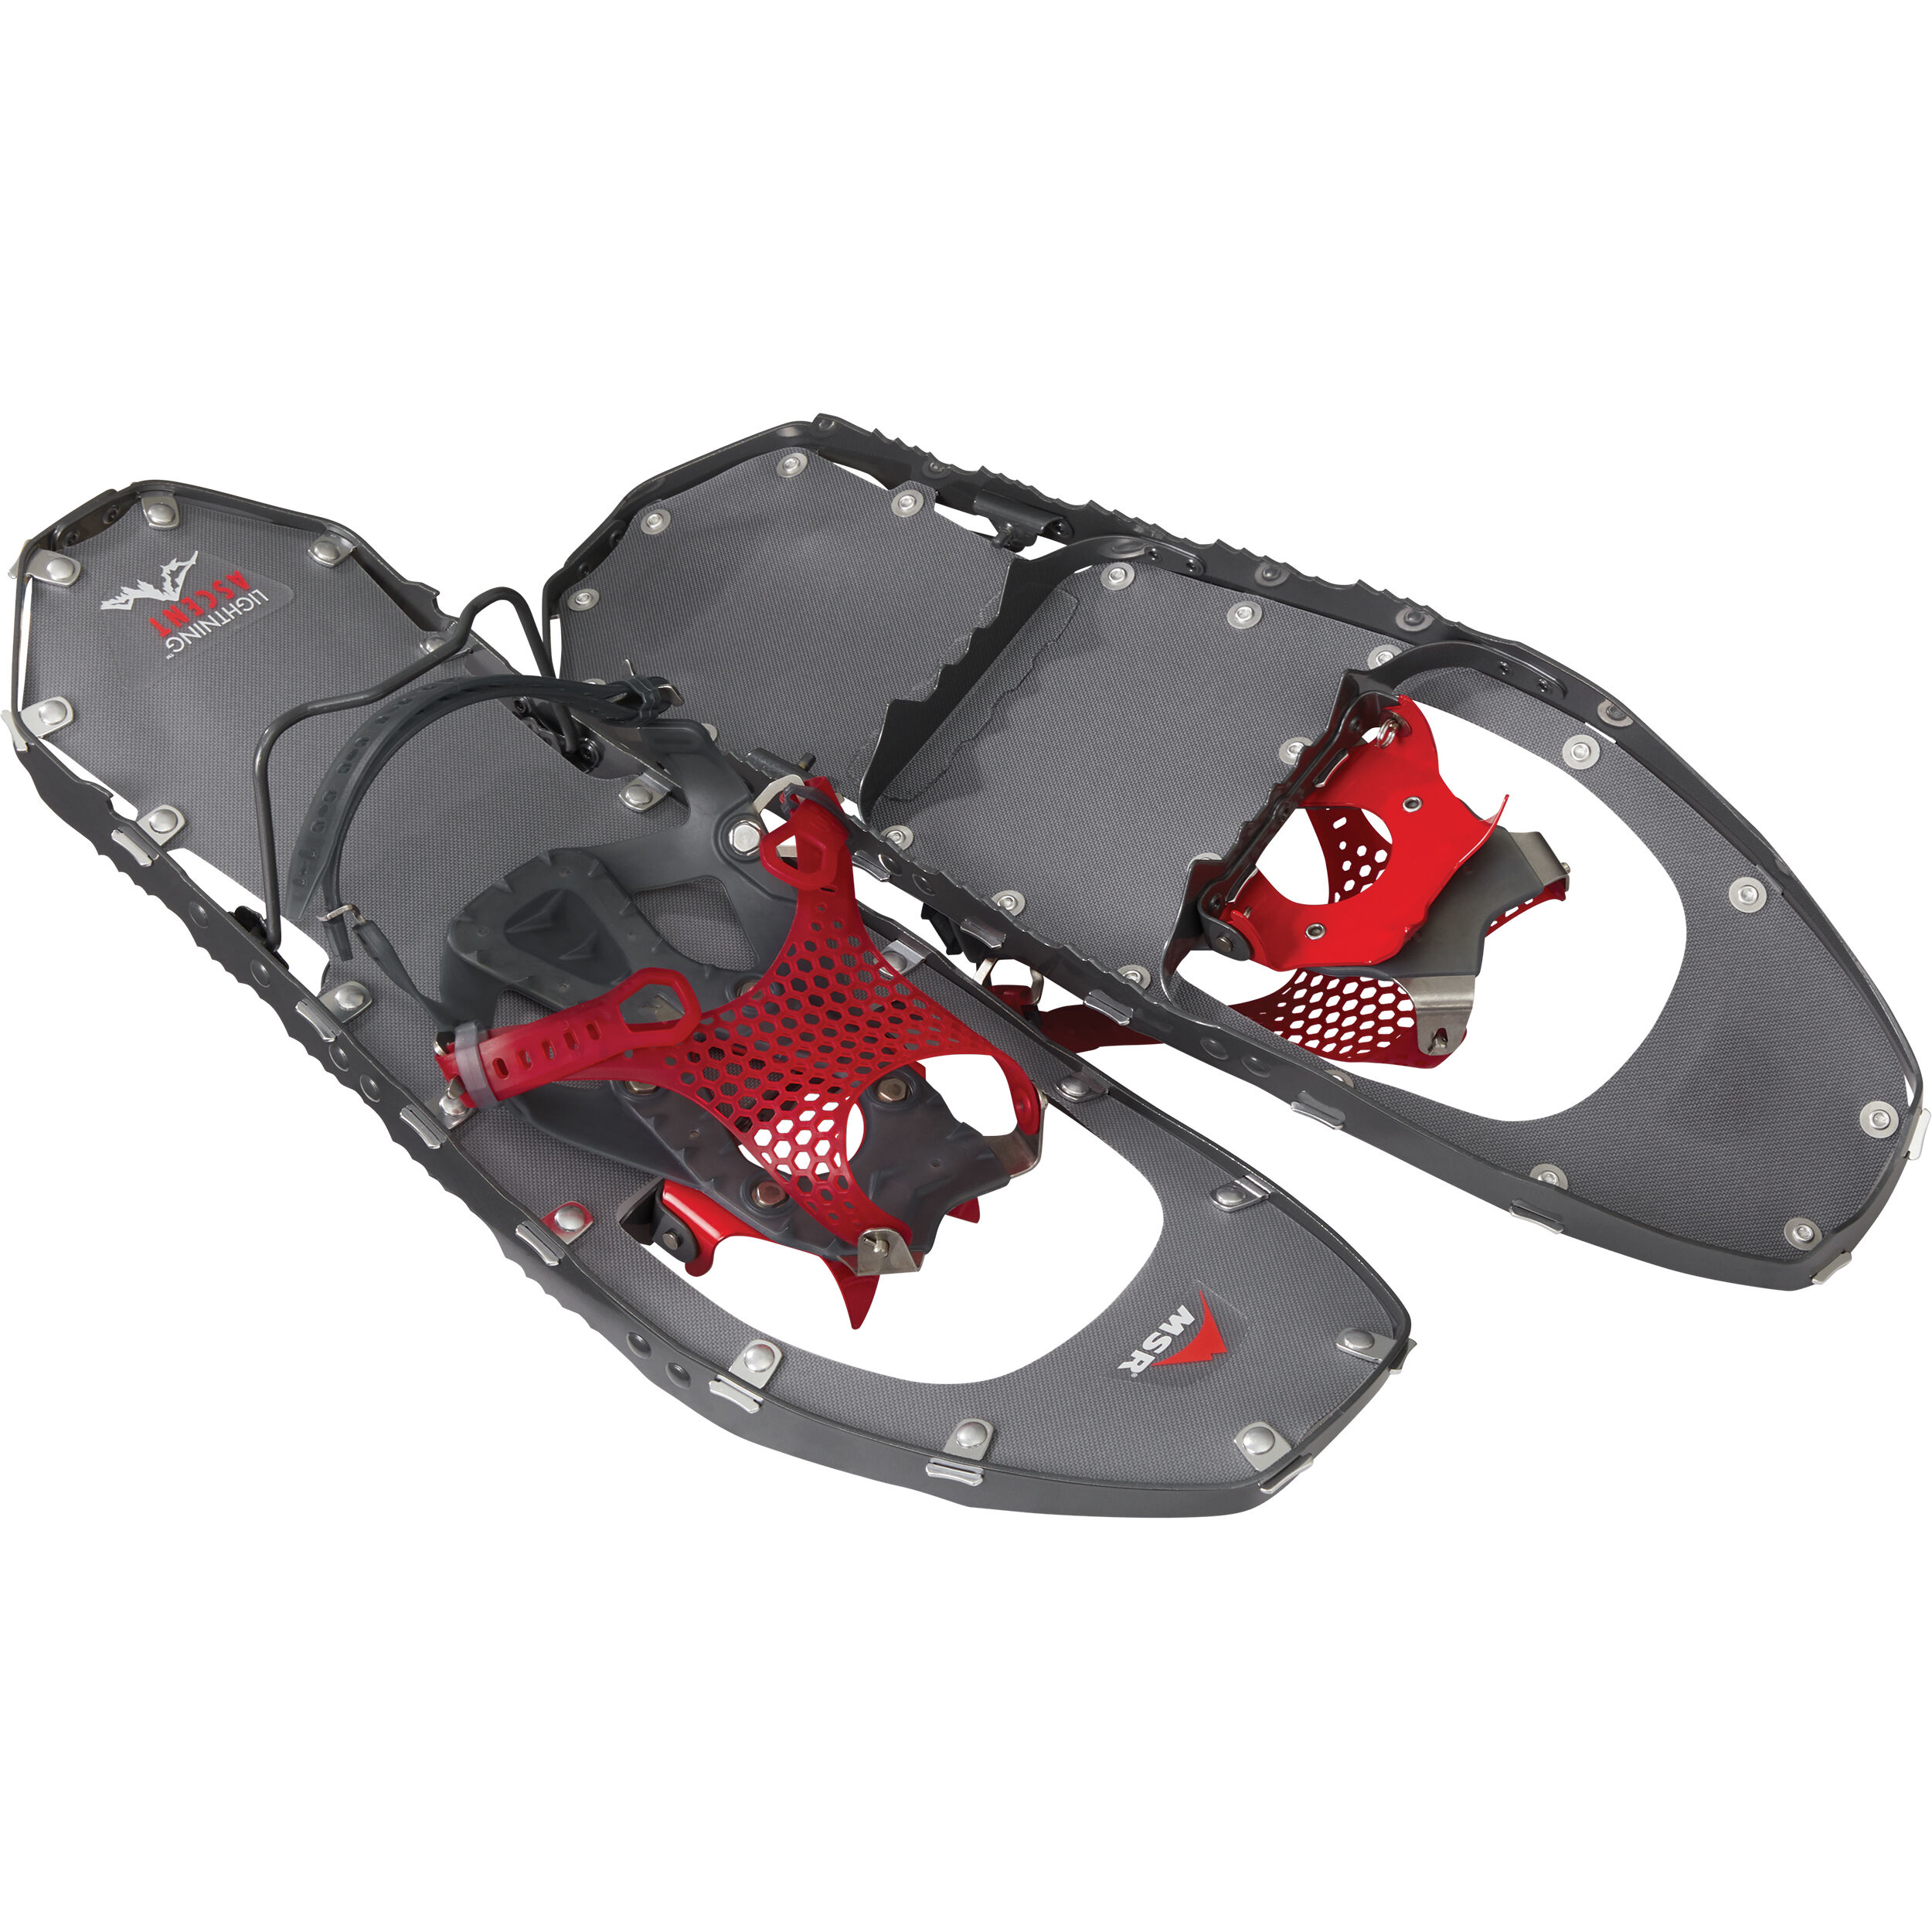 shoes for snowshoeing